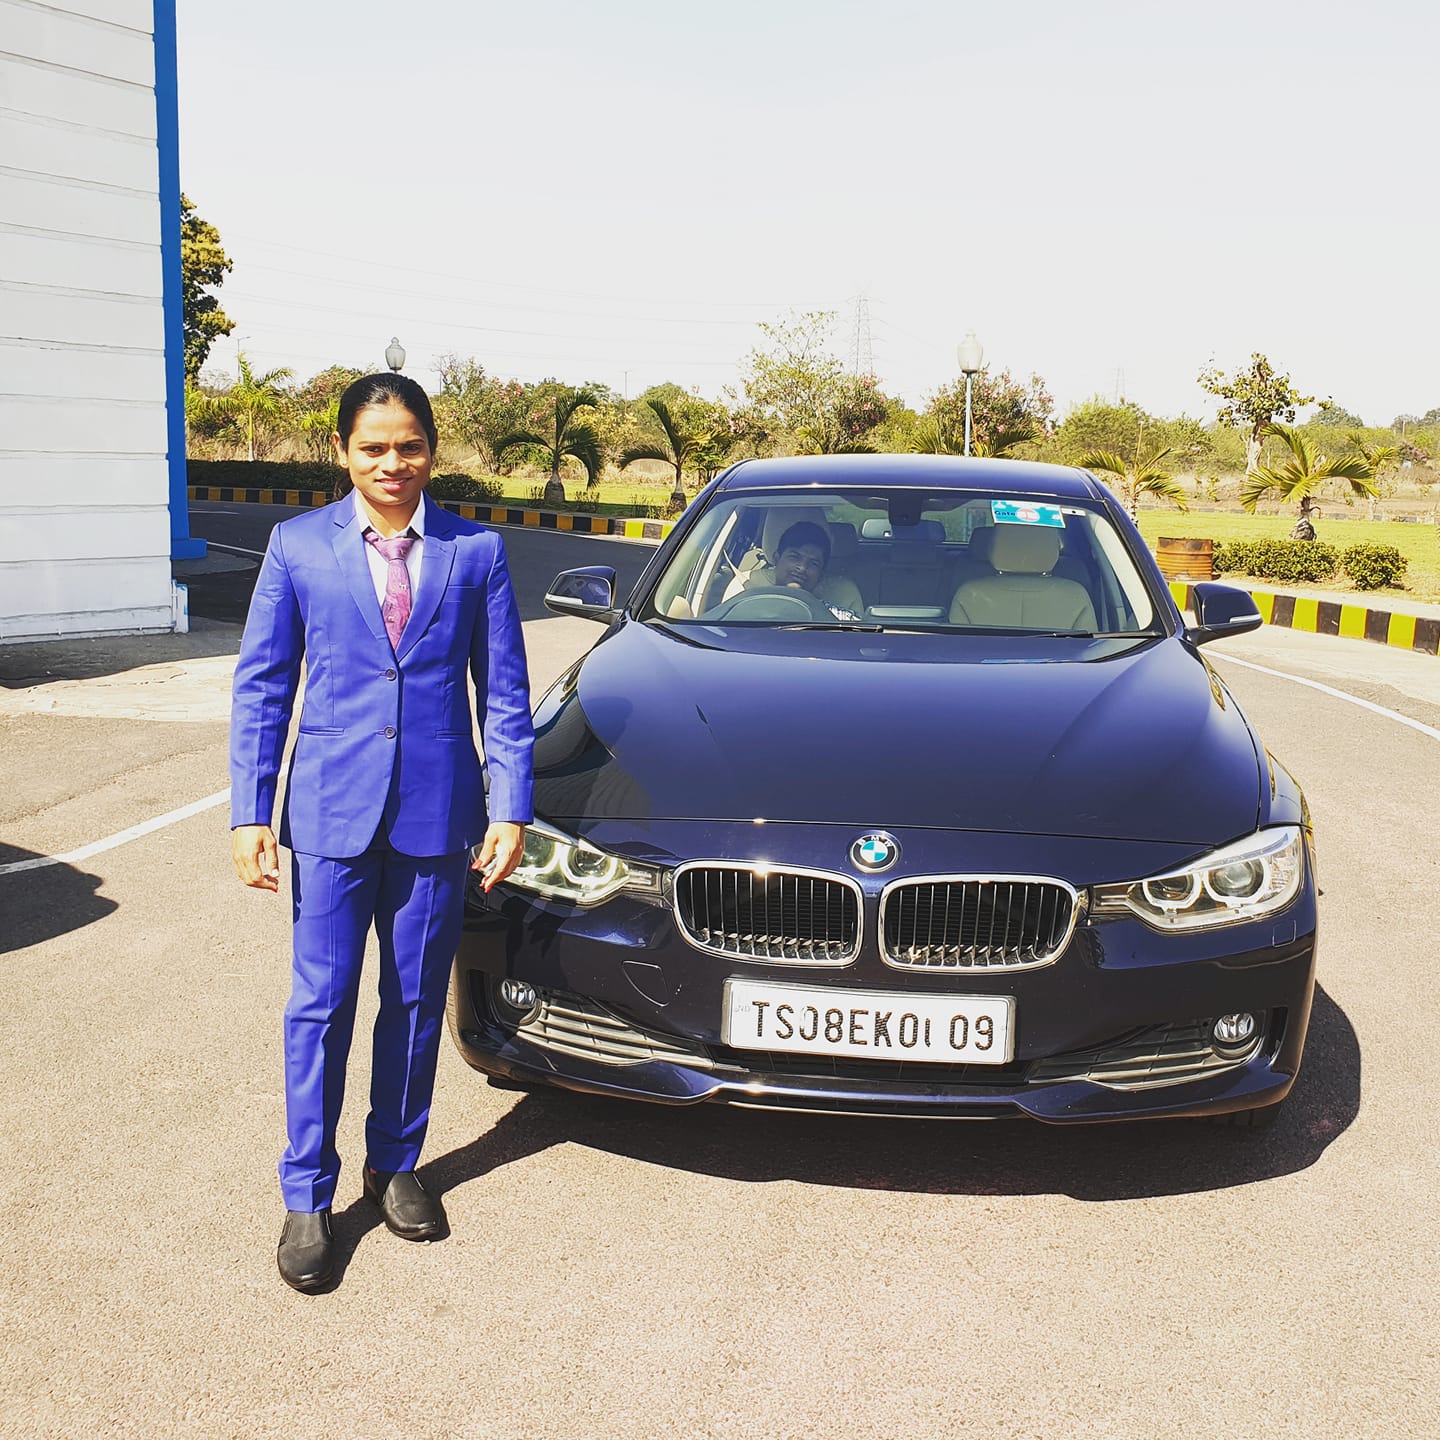 Dutee Chand to sell her BMW to gather money durig Covid 19 crisis